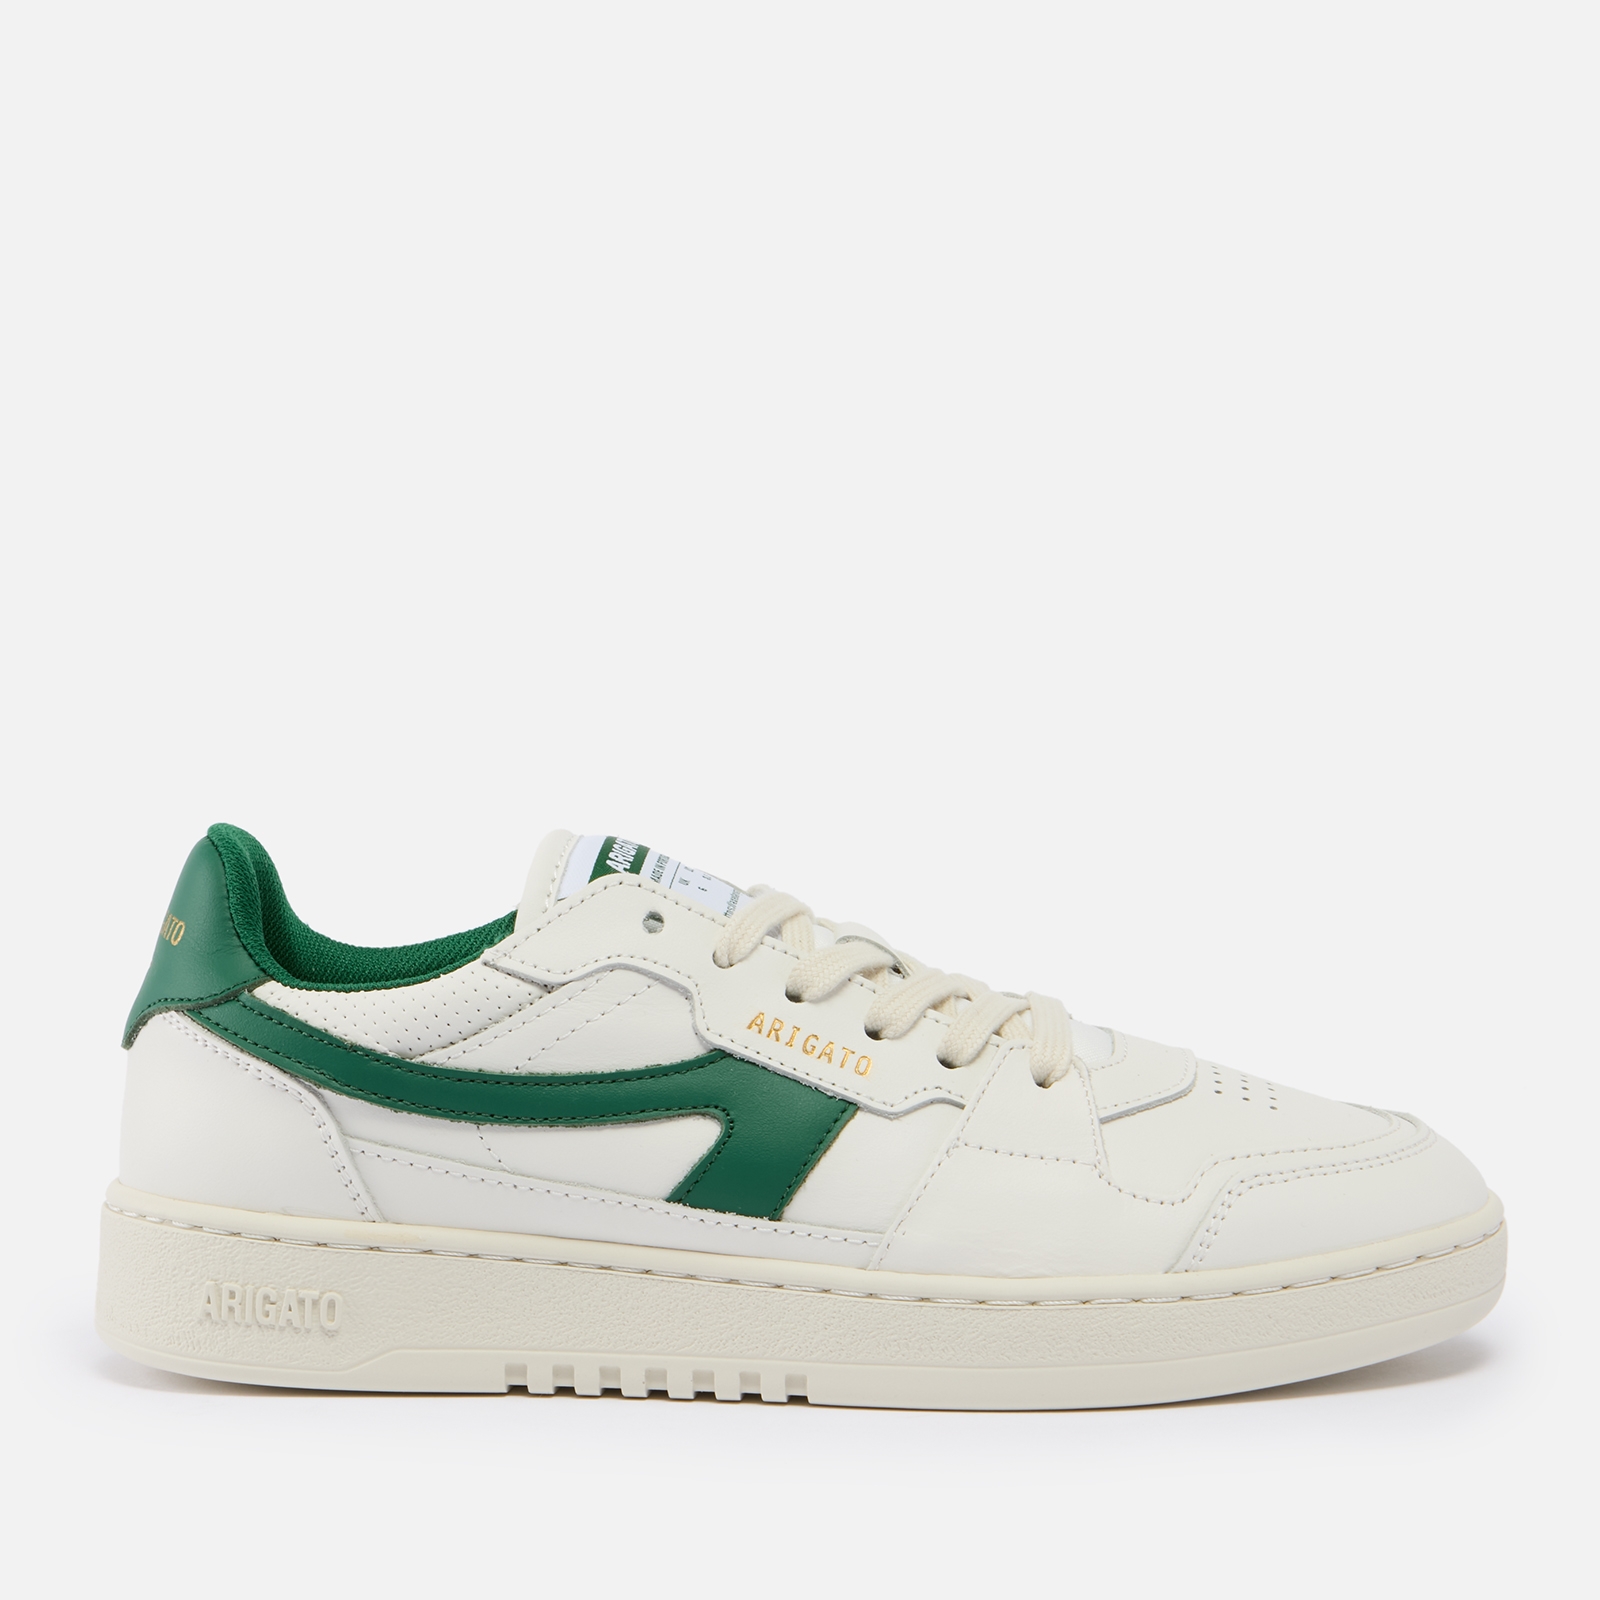 Axel Arigato Women's Dice A Leather Trainers - White/Green - UK 3.5